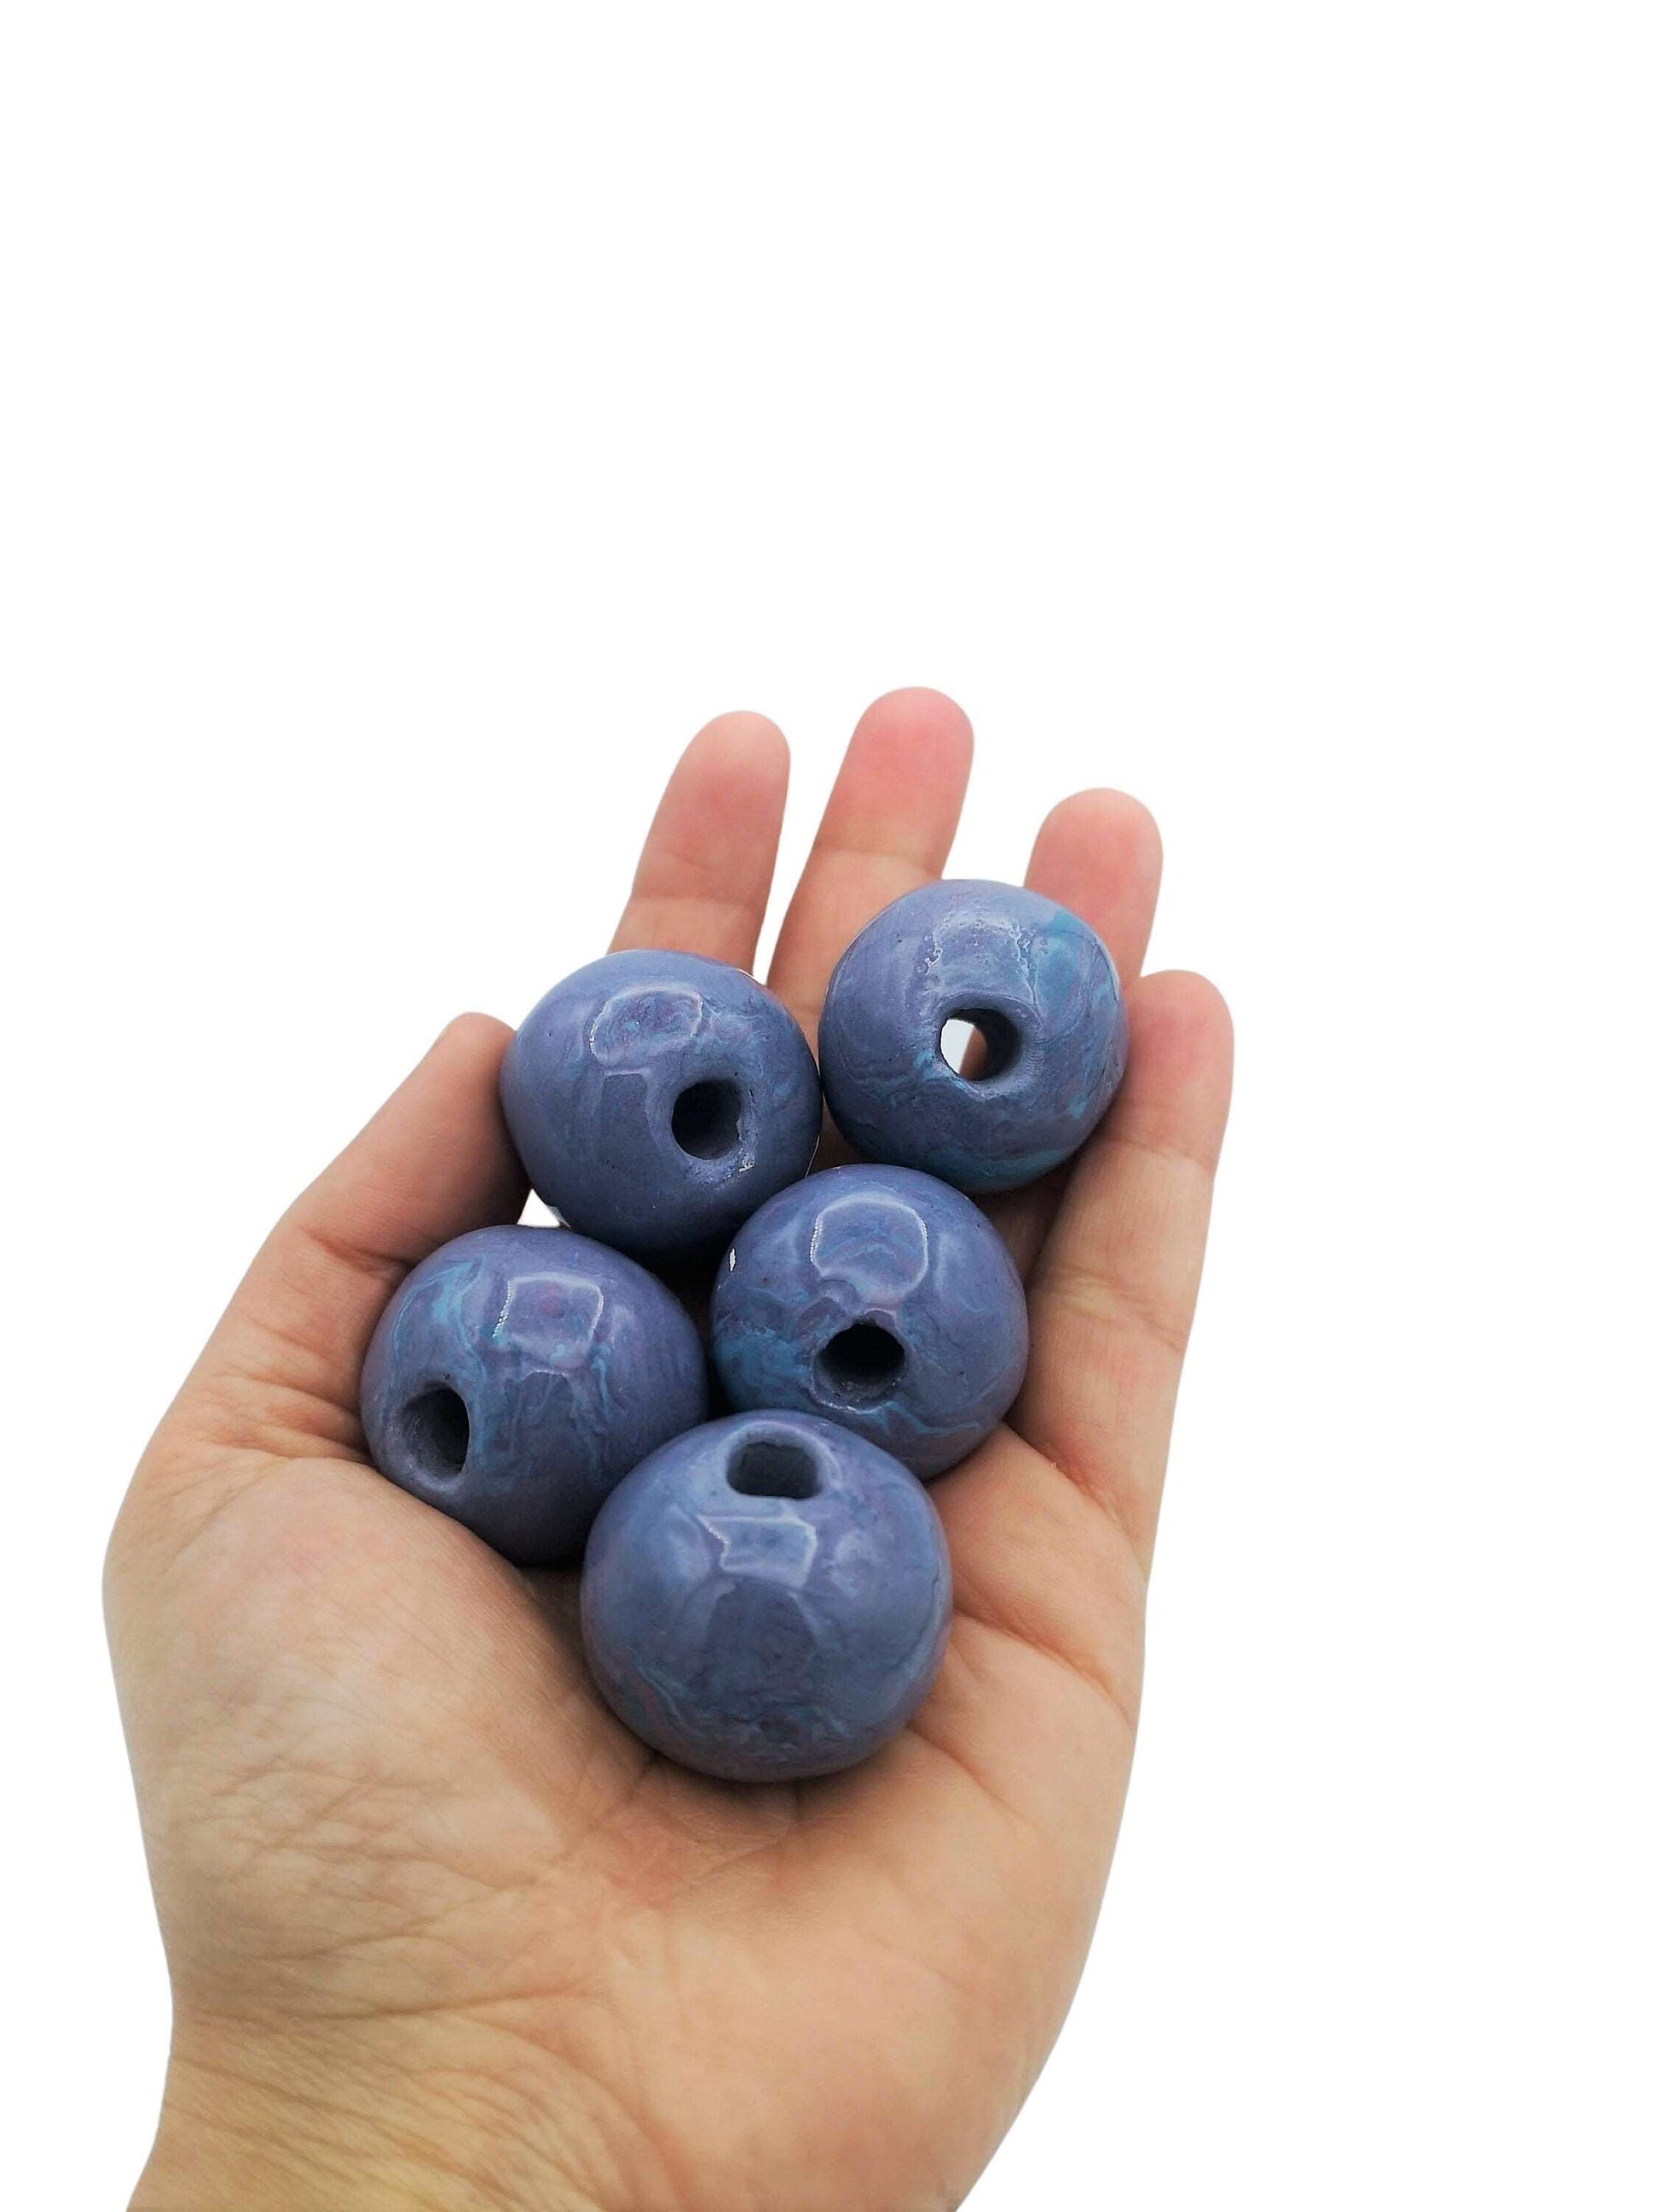 1Pc 30mm Extra Large Bead For Macrame, Marbled Handmade Ceramic 7mm Large Hole Beads For Chunky Jewelry Making, Unique Purple And Blue Beads